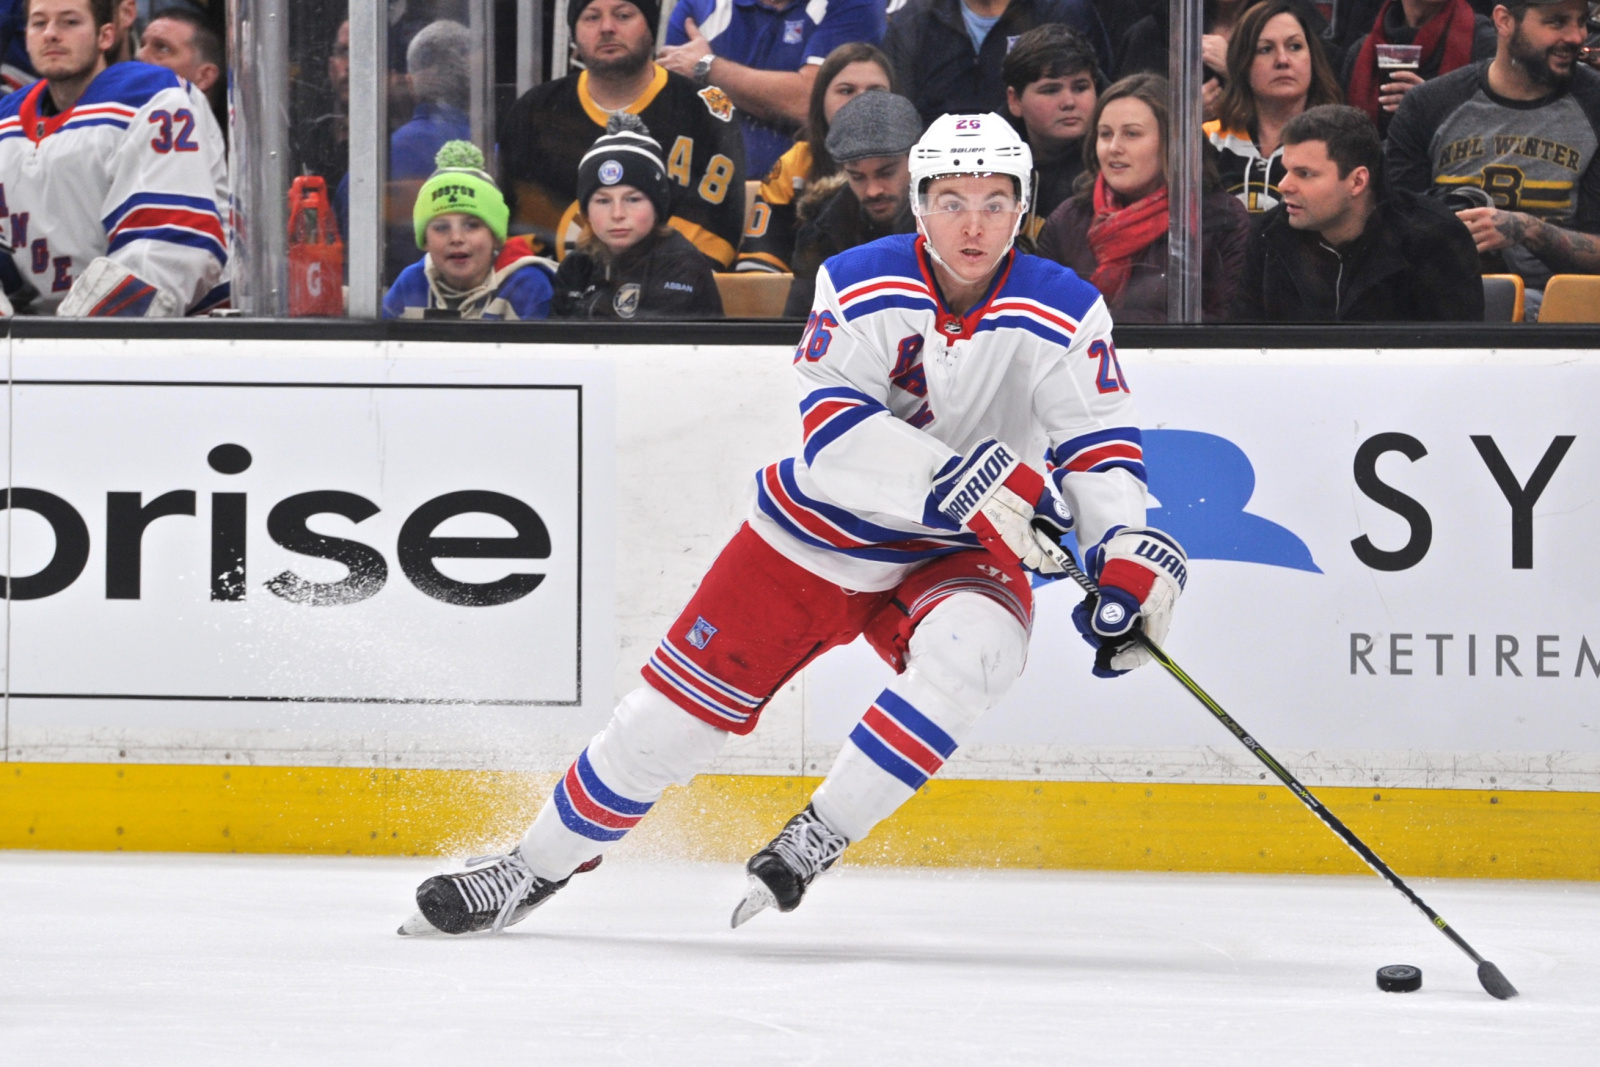 Jimmy Vesey happy to be back playing hockey